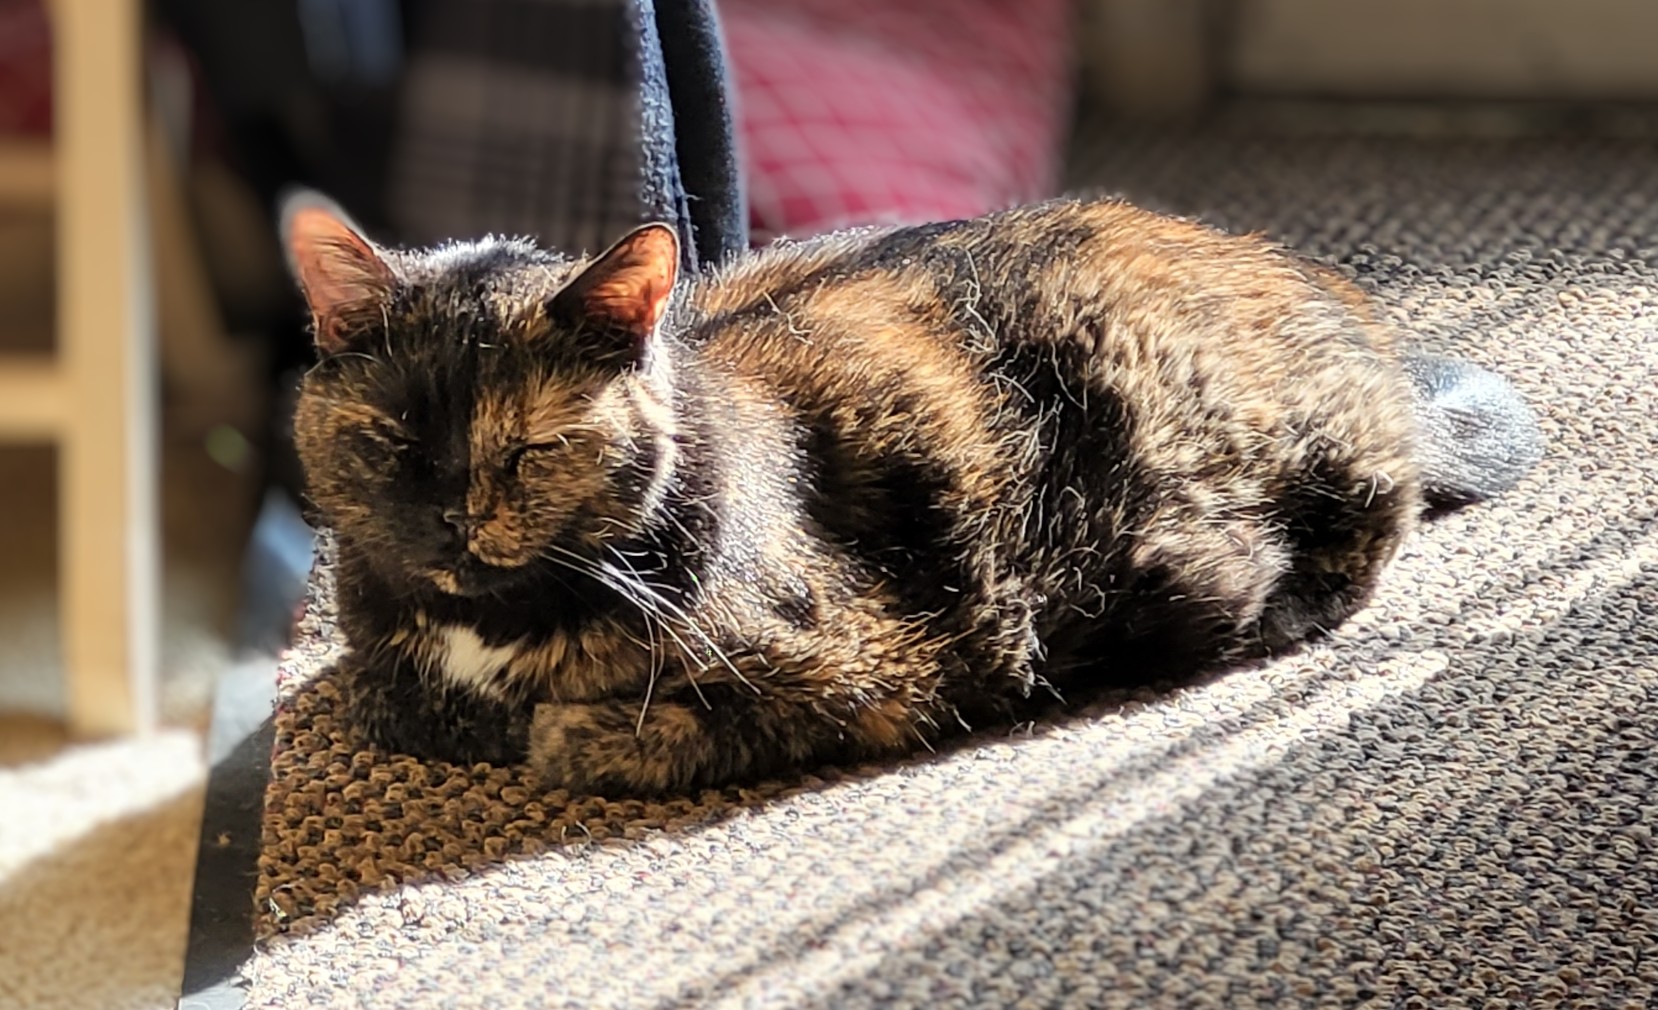 Lily, a black and orange tortie cat, in a loaf pose in sunbeams on the floor